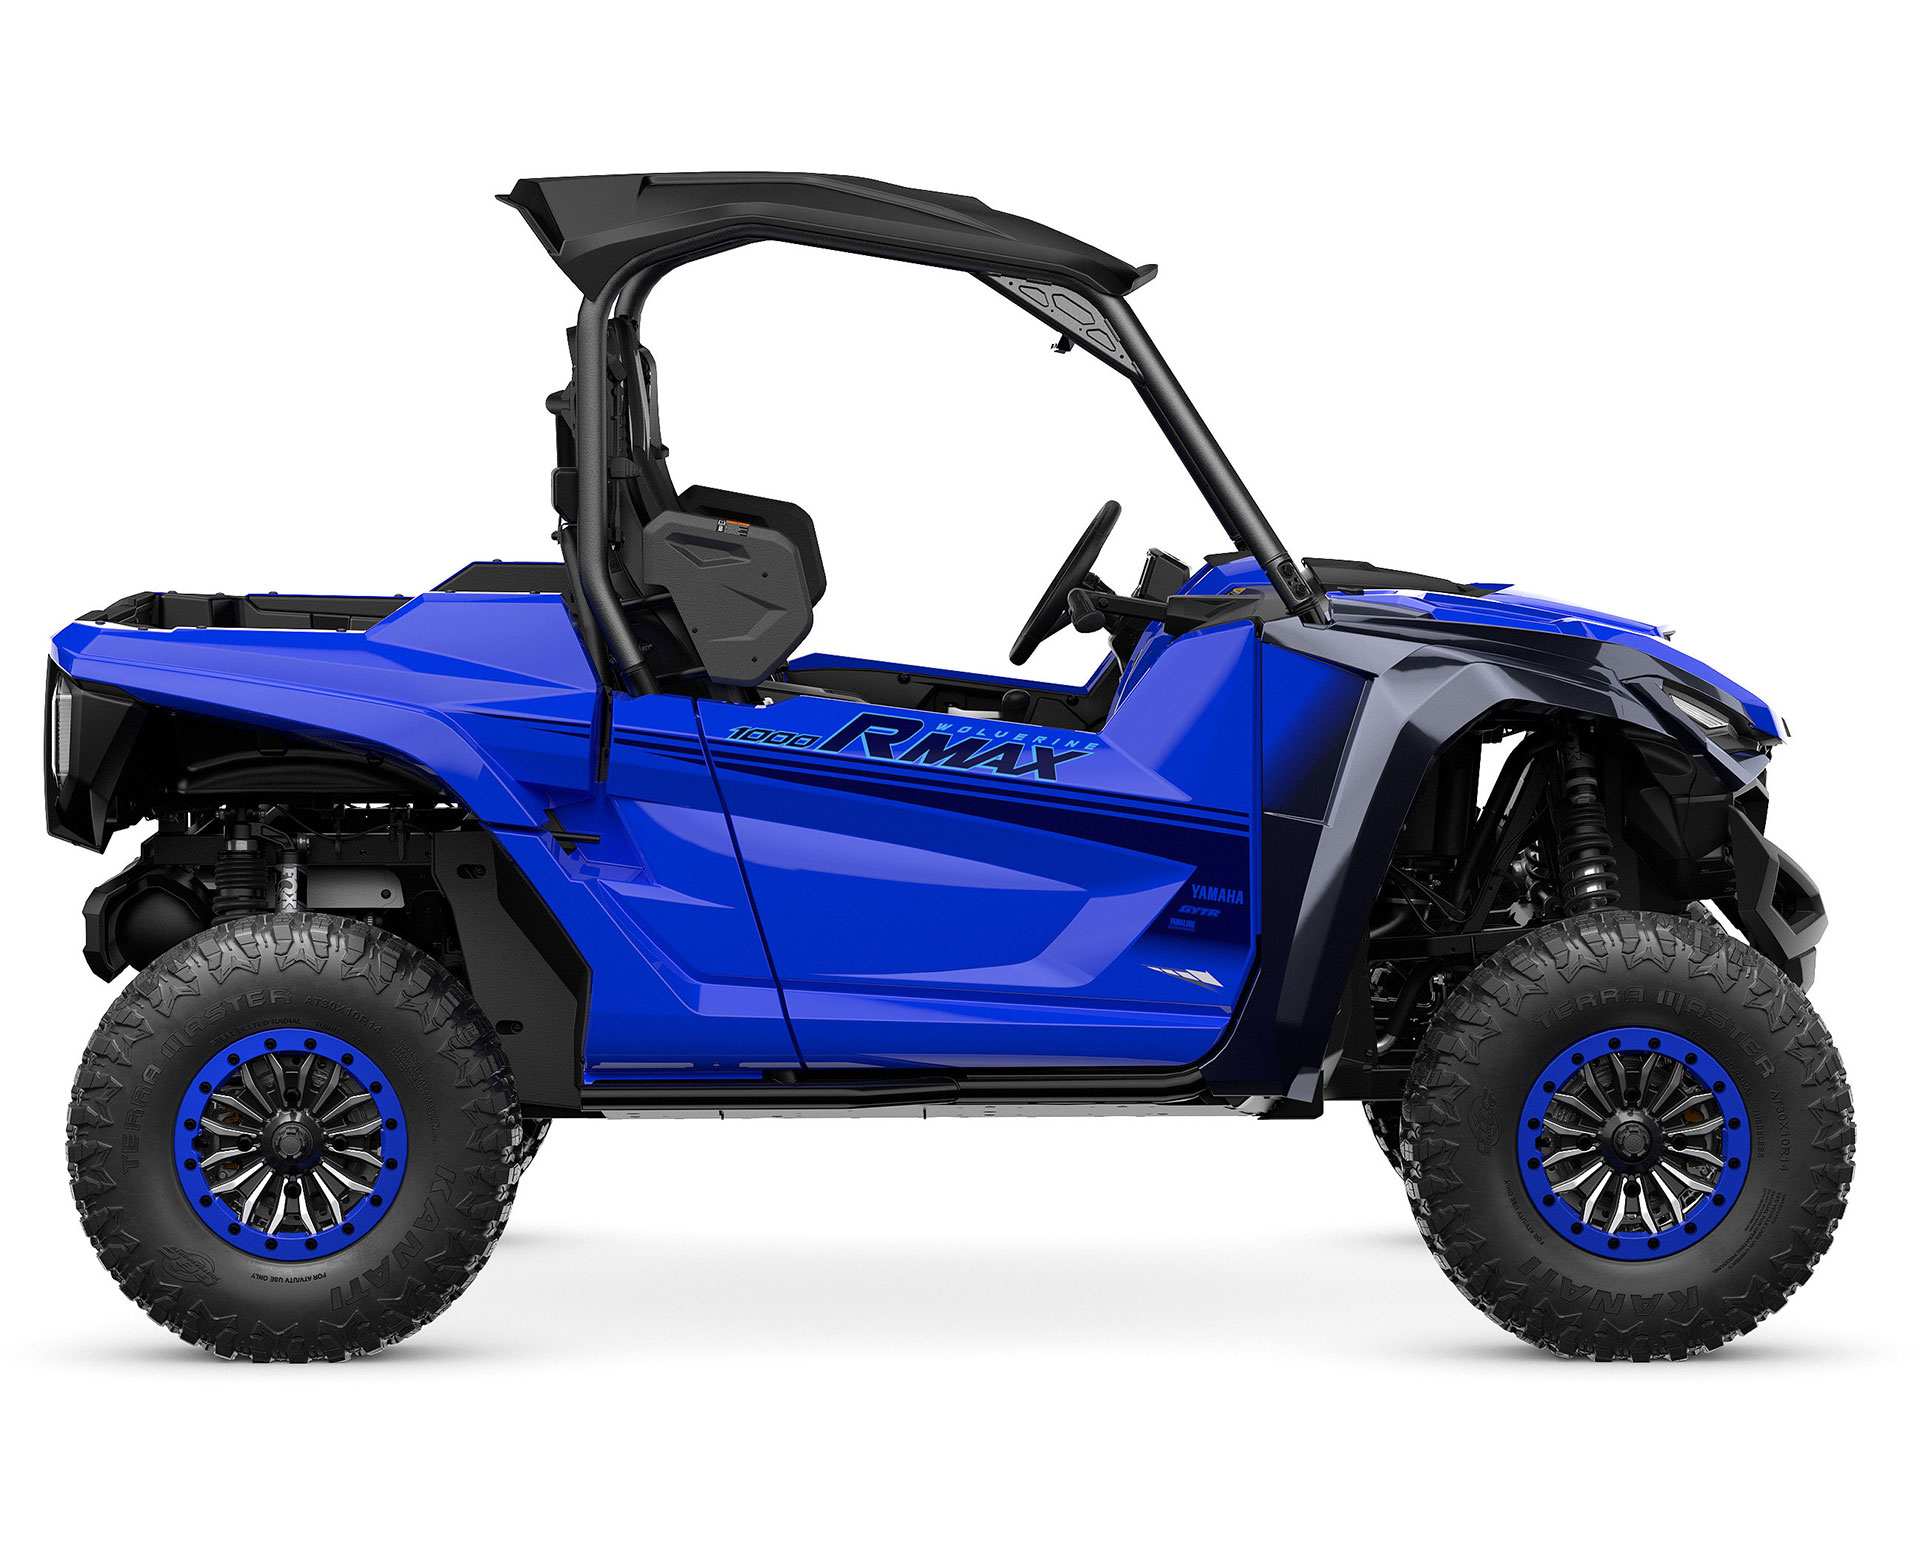 Thumbnail of your customized WOLVERINE(MD) RMAX(MC) 2 1000 SPORT 2024